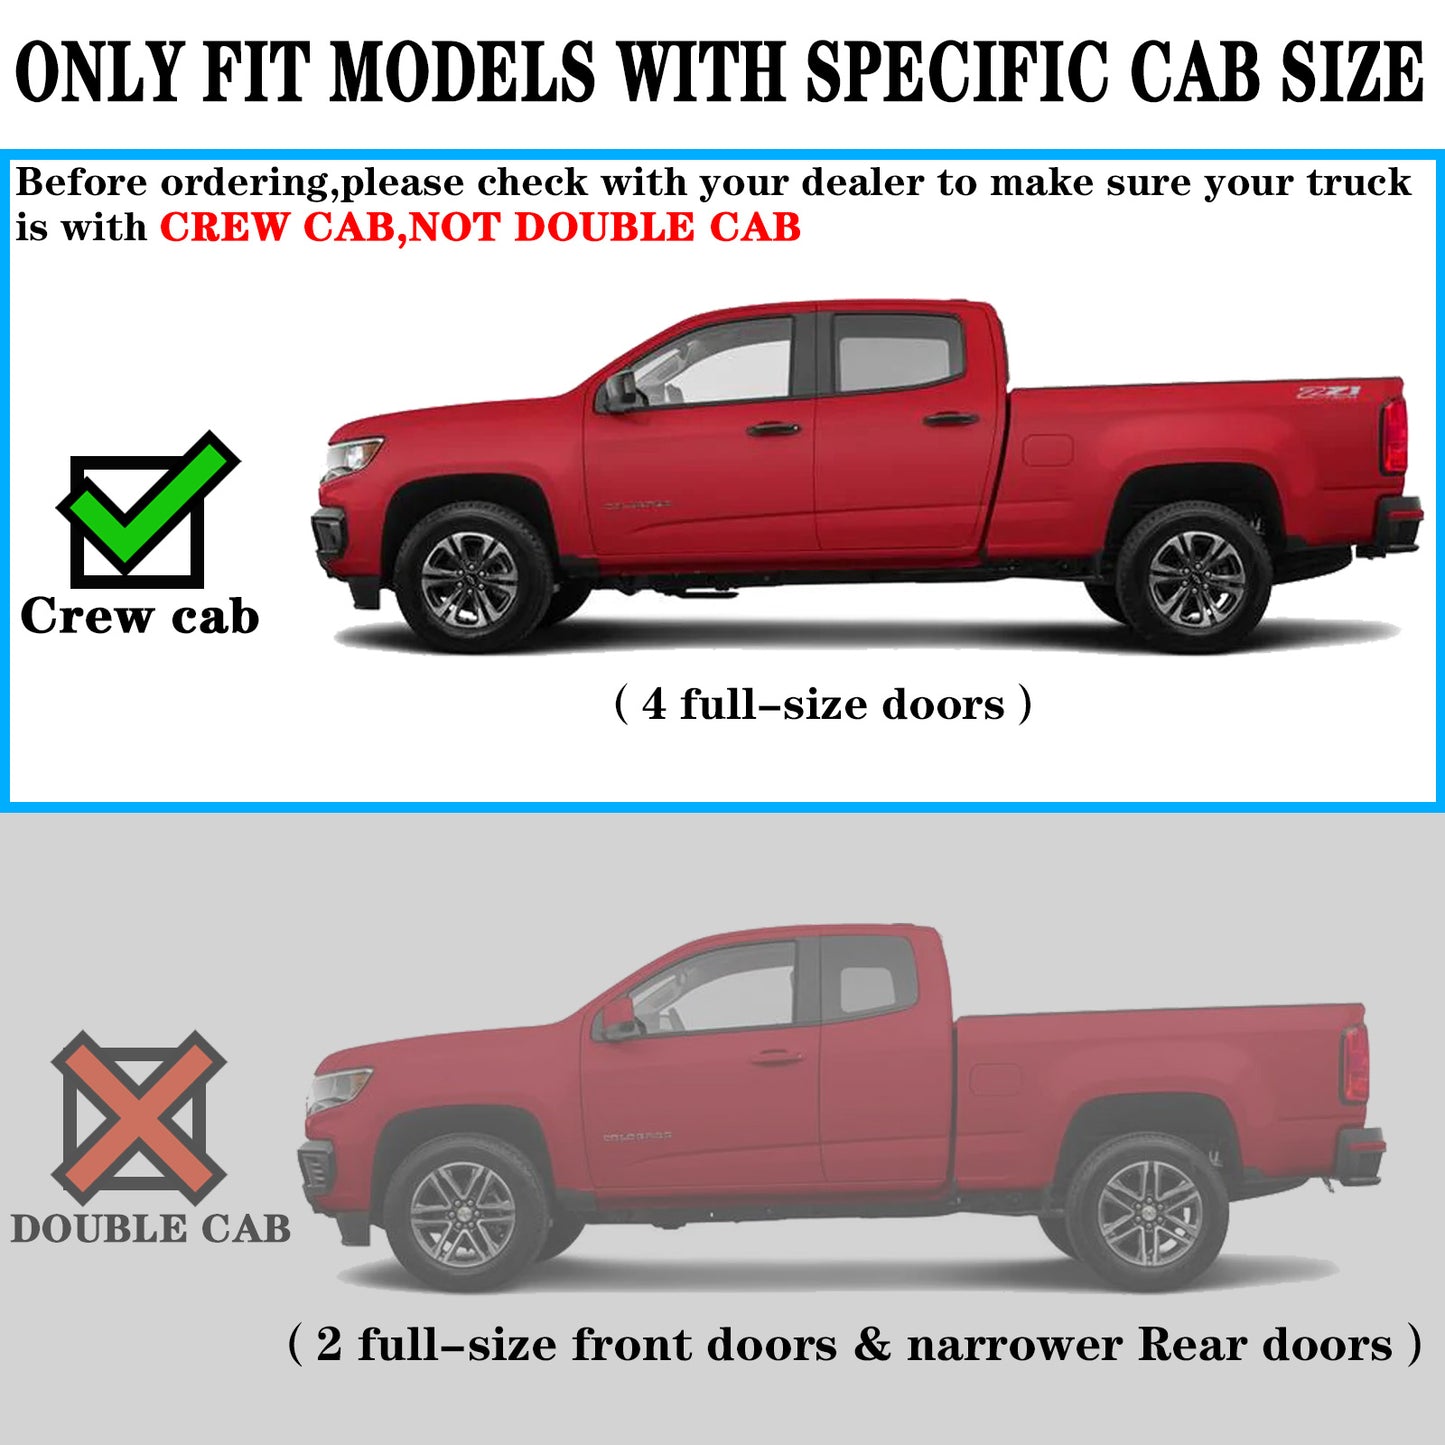 6.5” Running Boards Compatible with 2022-2024 Toyota Tundra Crewmax Cab, Black Side Steps T6 Style.- COMNOVA AUTOPART